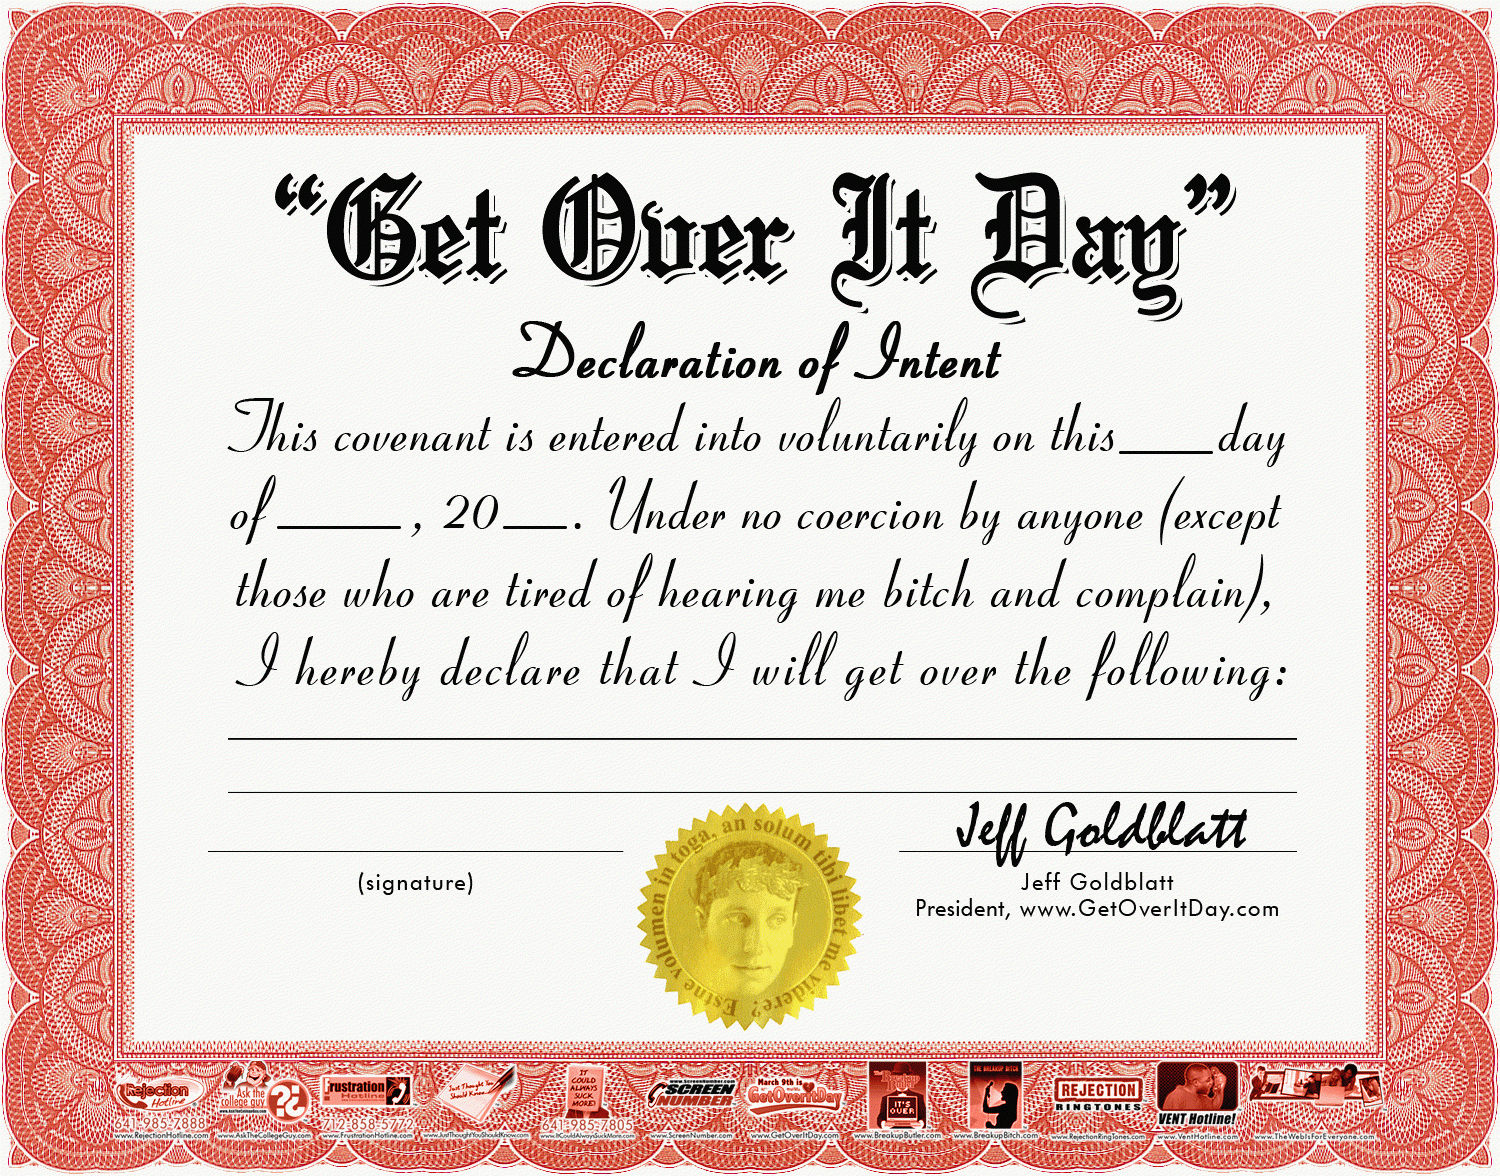 Funny Office Awards Youtube. Silly Certificates Funny Awards Pertaining To Funny Certificate Templates